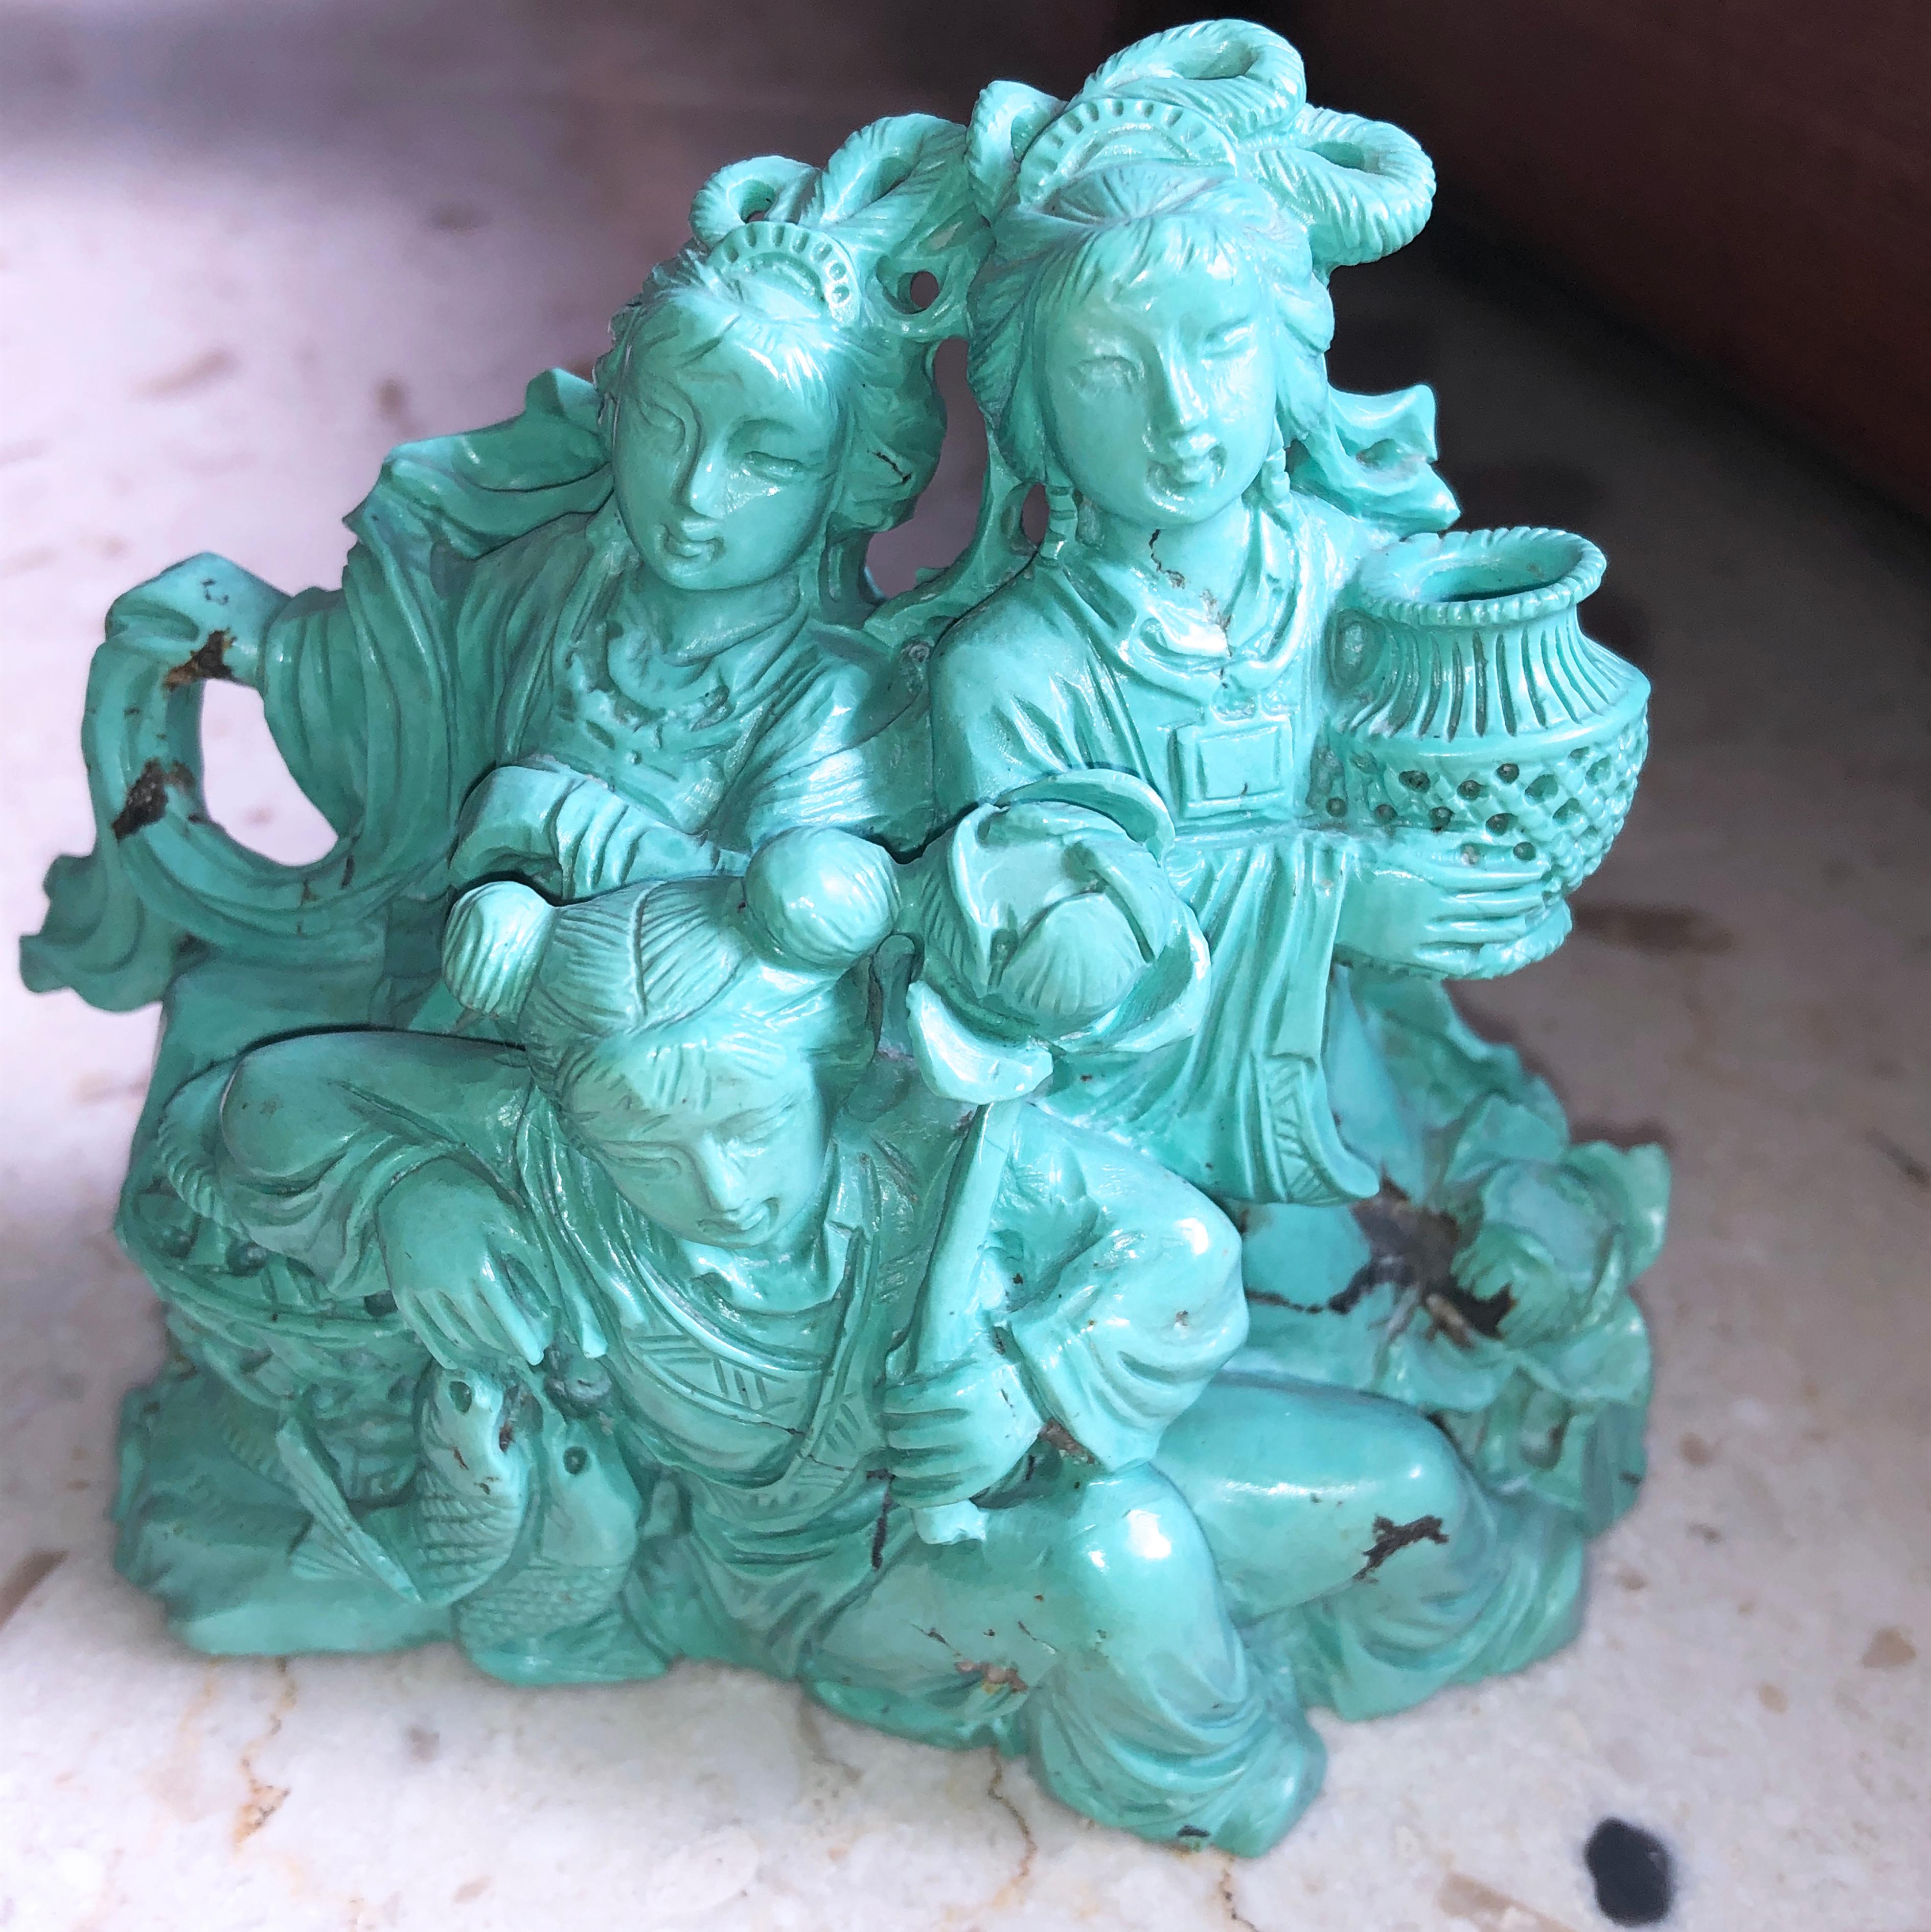 One-of-a-kind, Original 1930, Chinese Export Natural Turquoise Three Dames Sculpture. Natural Turquoise is of Persian Origin and Hand Carving and Engraving Work is Beautiffully Crisp and Detailed.
This Unique piece is still in excellent conditions, 